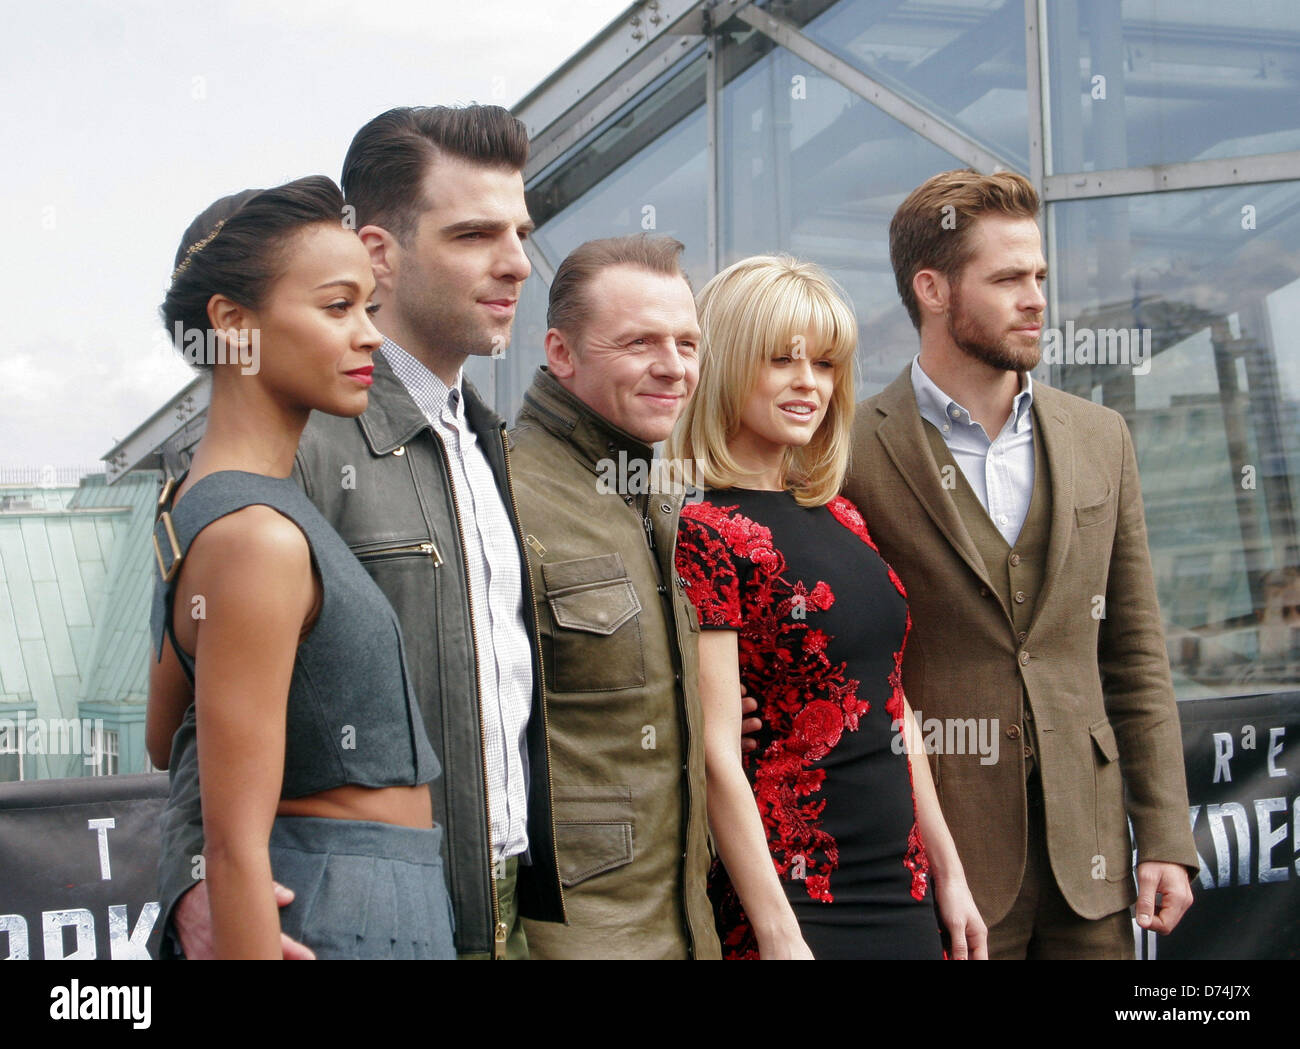 Berlin, Germany. 28th April, 2013. Actors Zoe Saldana (USA, L-R), Zachary Quinto (USA), Simon Pegg (Great Britain), Alice Eve (Great Britain) and Chris Pine (USA) pose during the presentation of the movie 'Star Trek Into Darkness' in Berlin, Germany, 28 April 2013. The film will be released in Germany on 09 May 2013. Photo: XAMAX/dpa/dpa/Alamy Live News Stock Photo